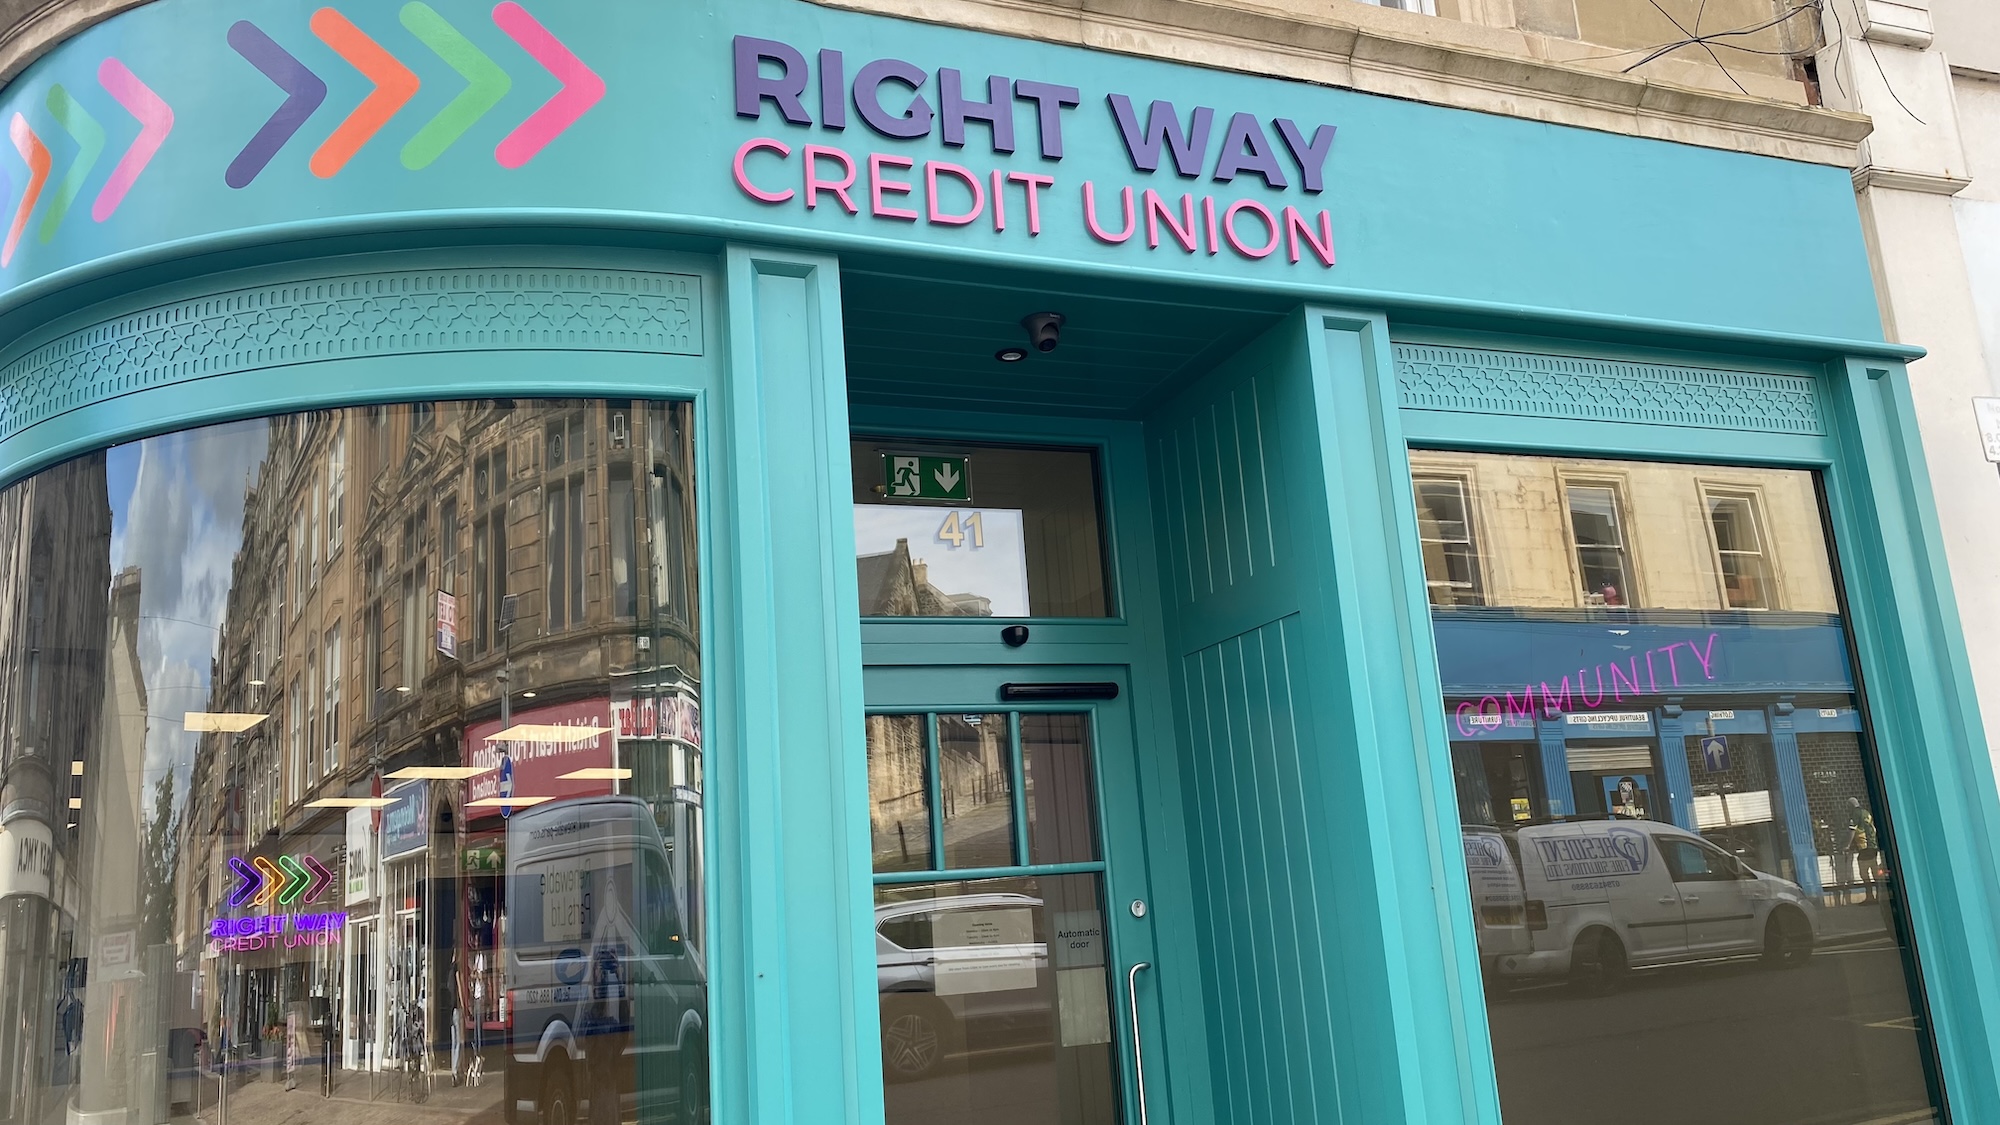 Greenock and Renfrewshire credit unions merge to serve over 11,000 across West of Scotland